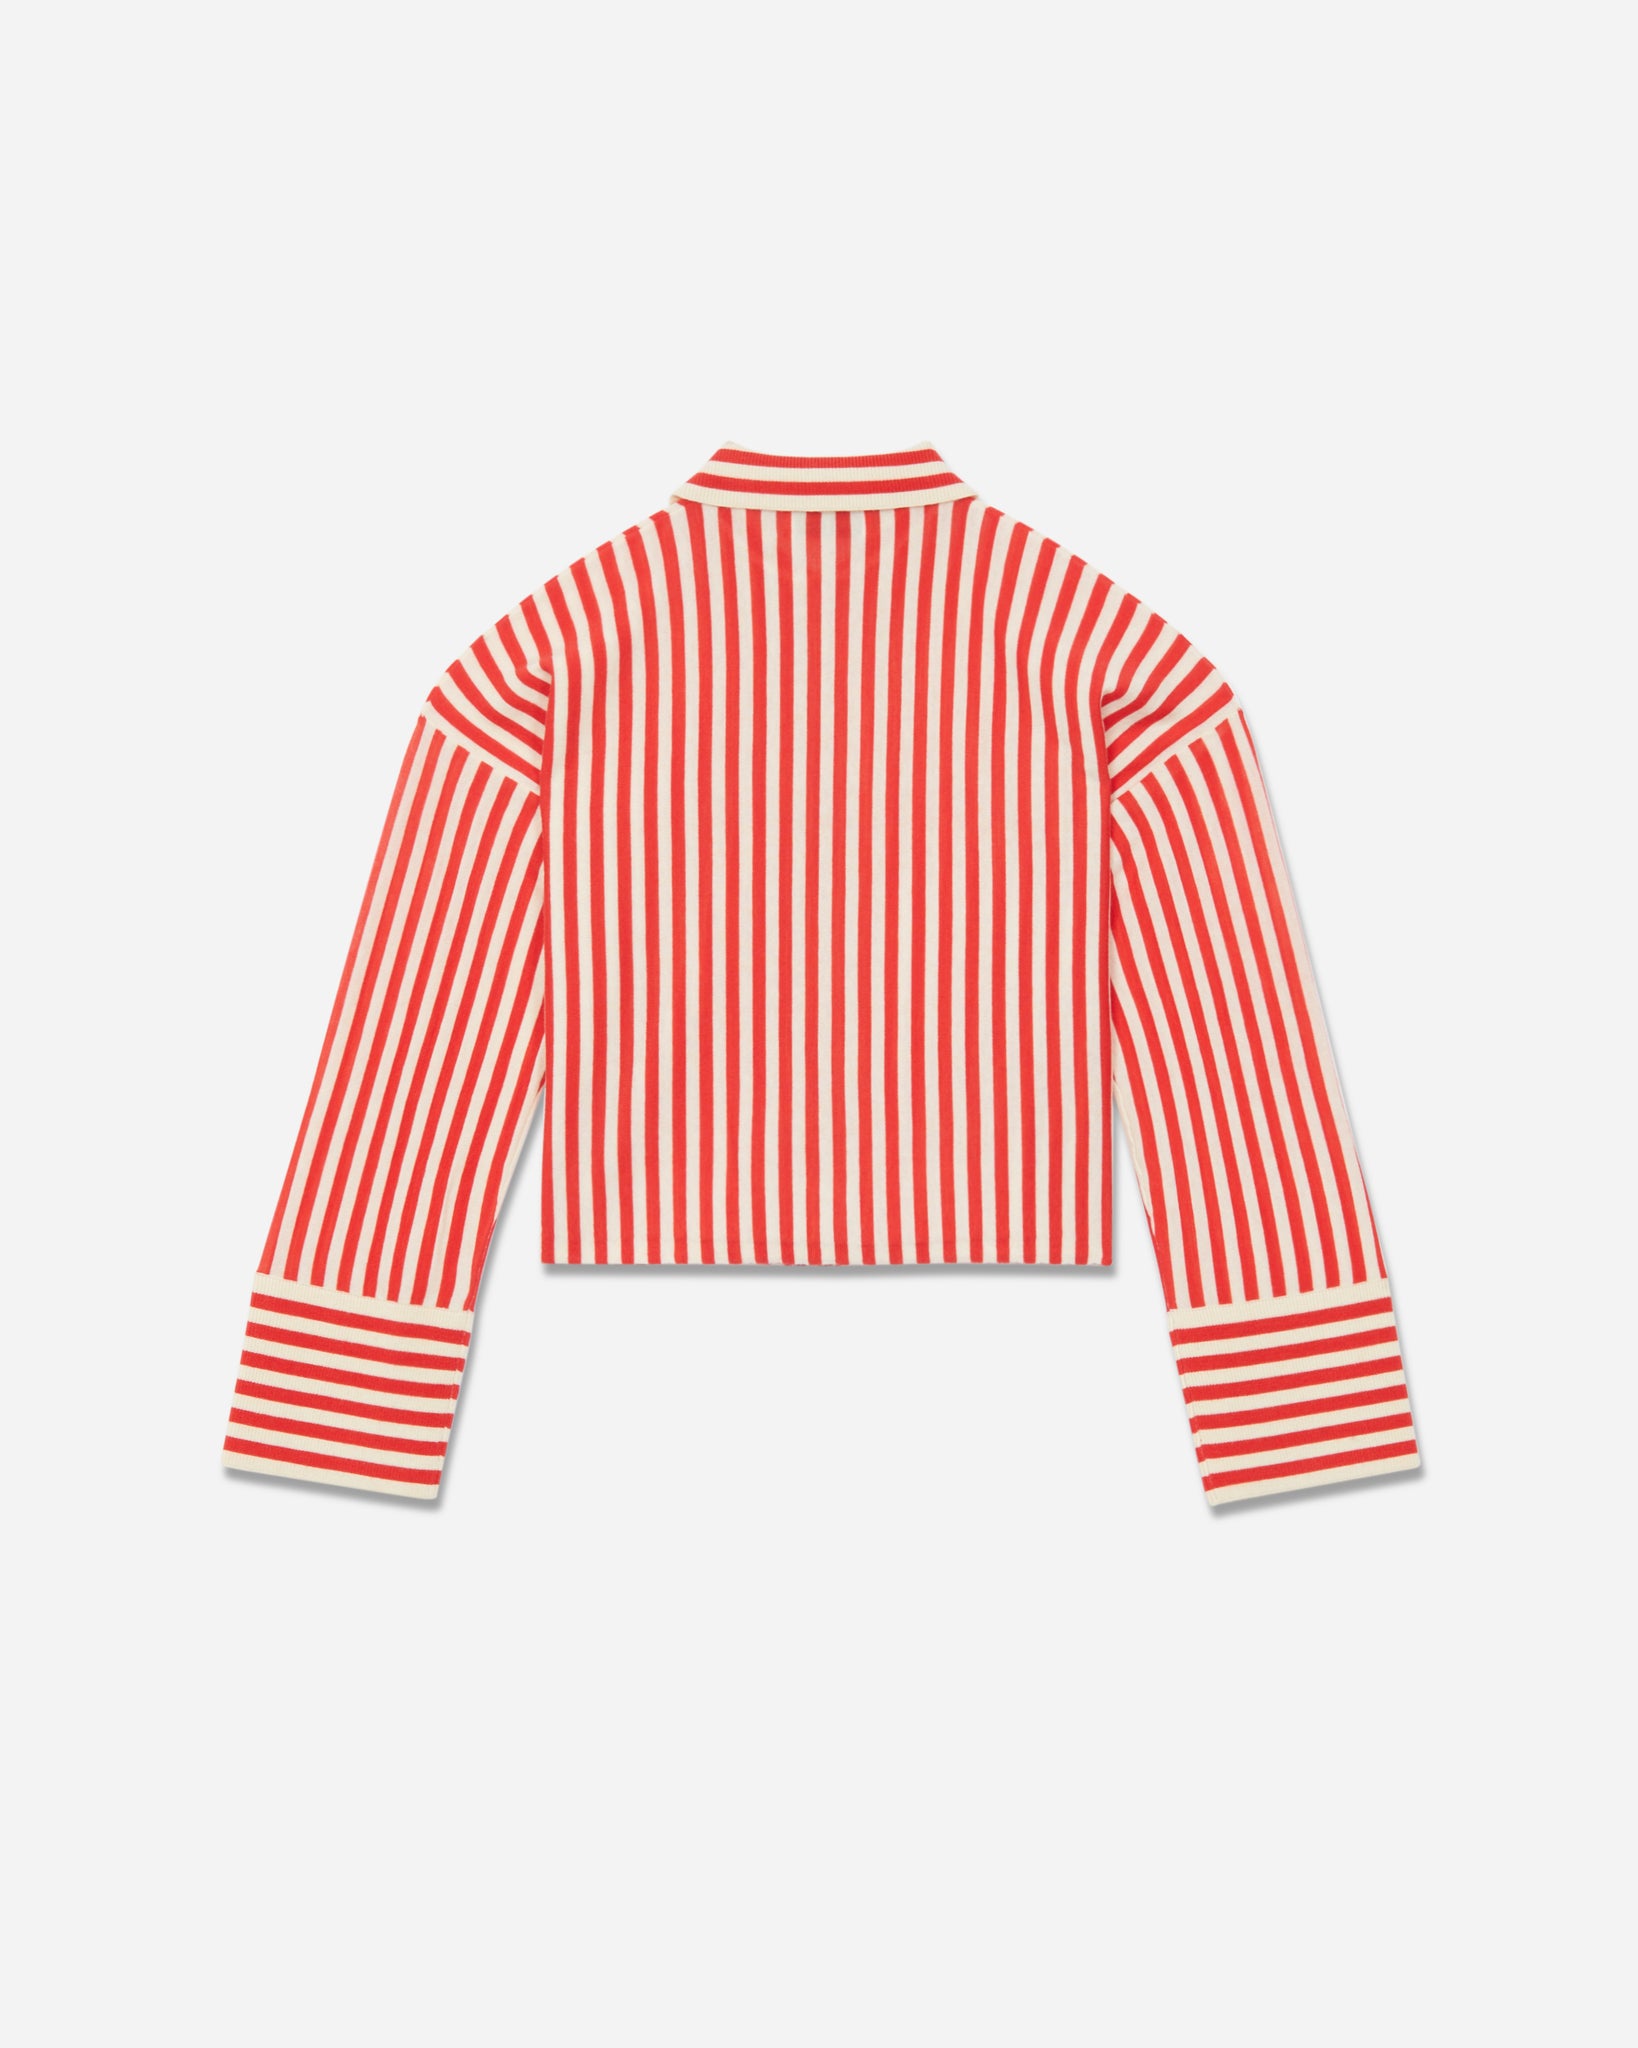 HATHAWAY SOFT-WRAP-SHIRT IN RED STRIPES